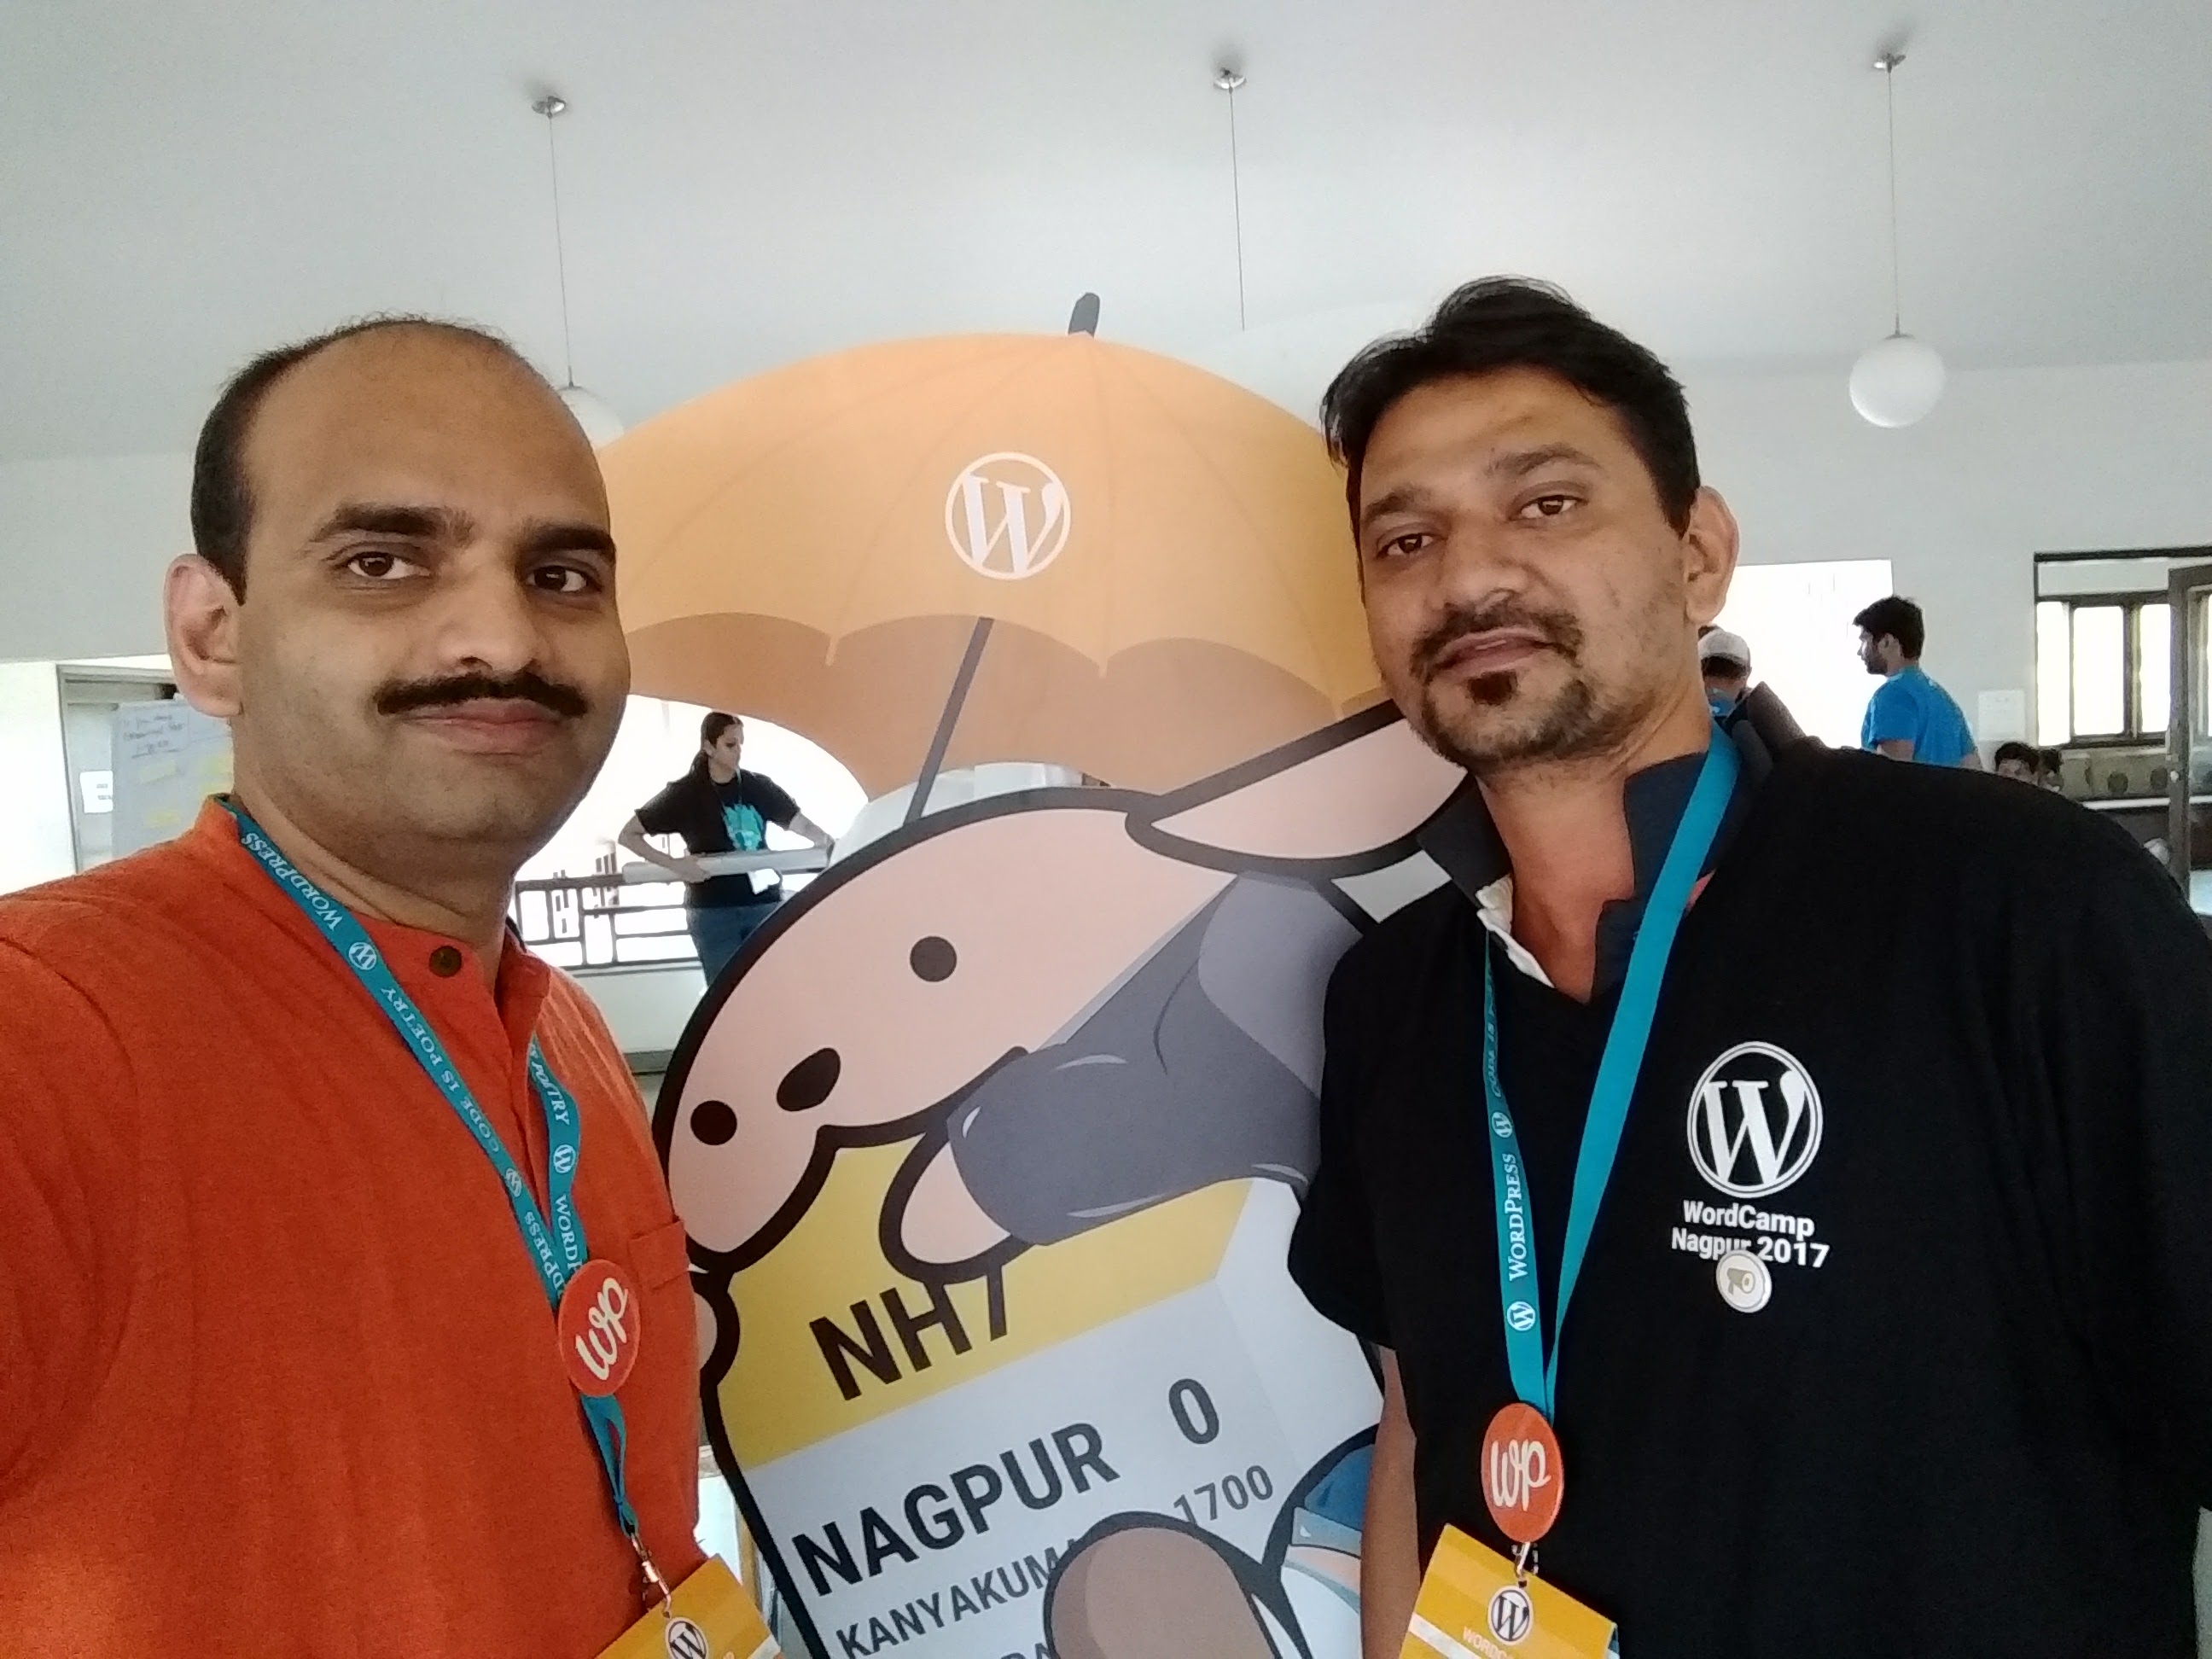 Our Experience at WordCamp Nagpur 2017